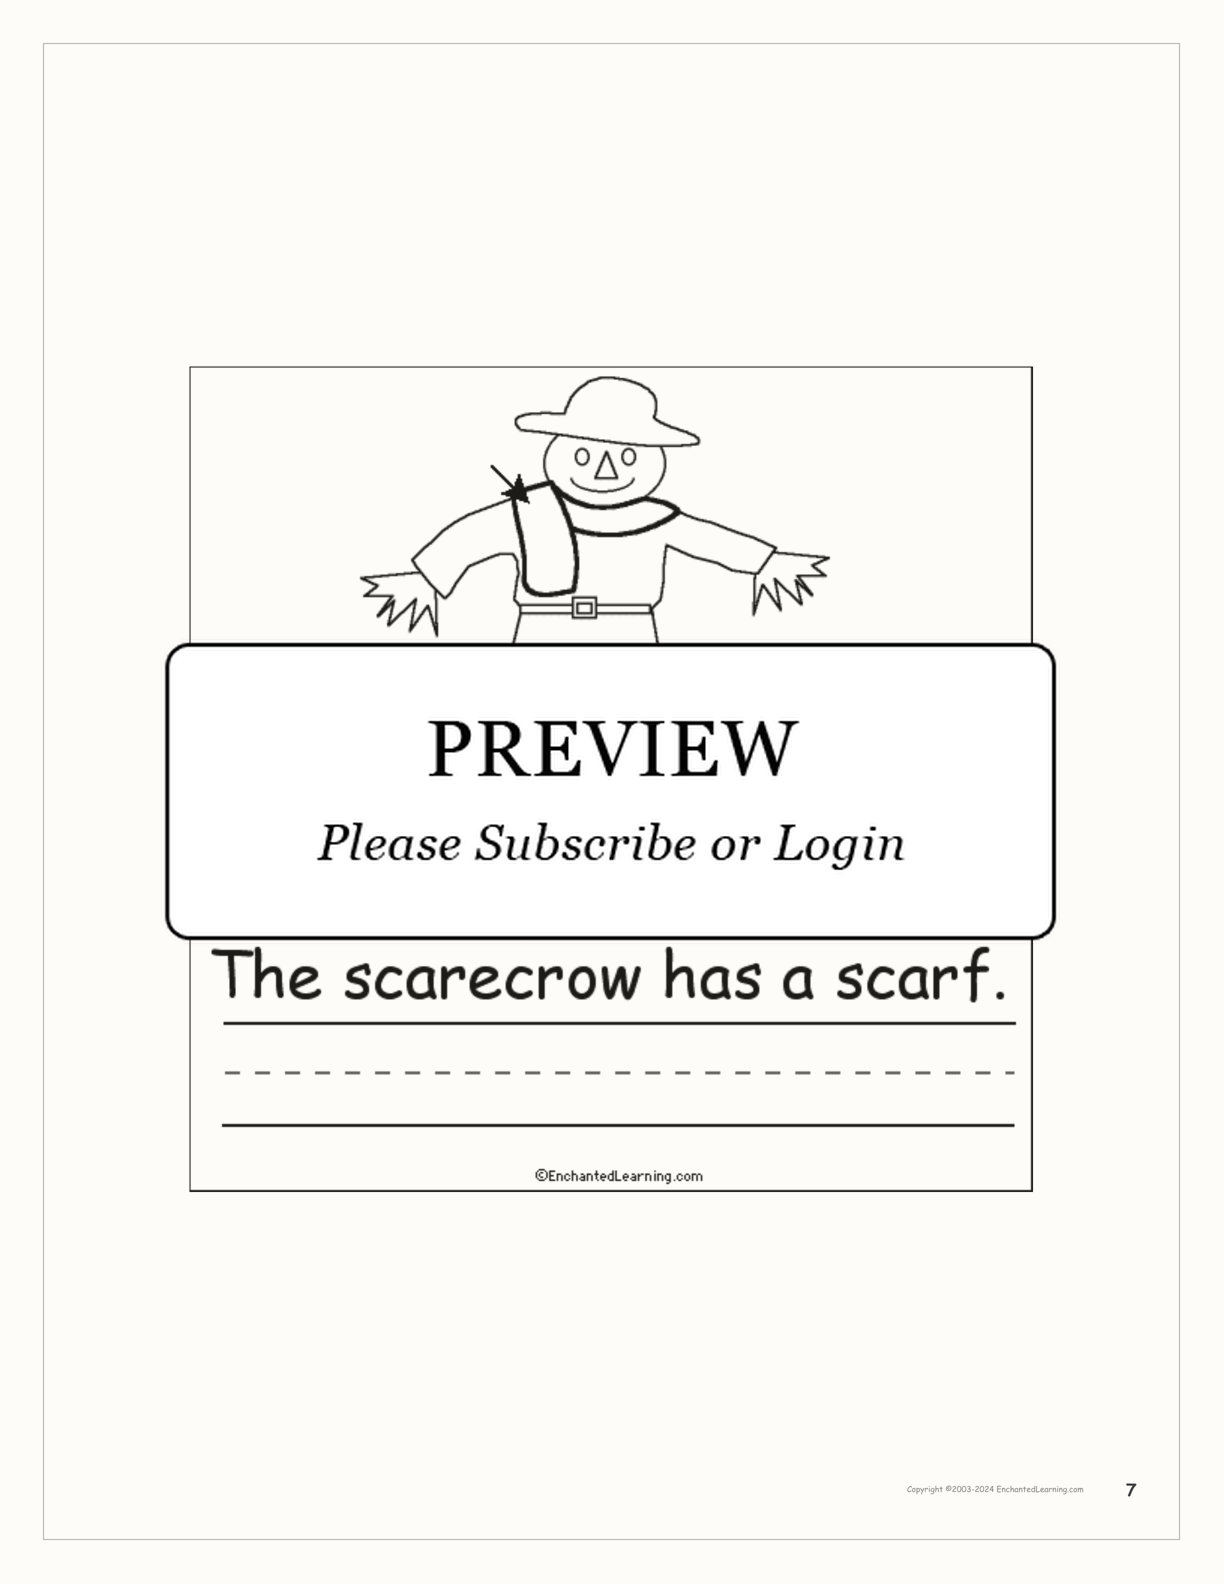 The Scarecrow's Clothes interactive printout page 7